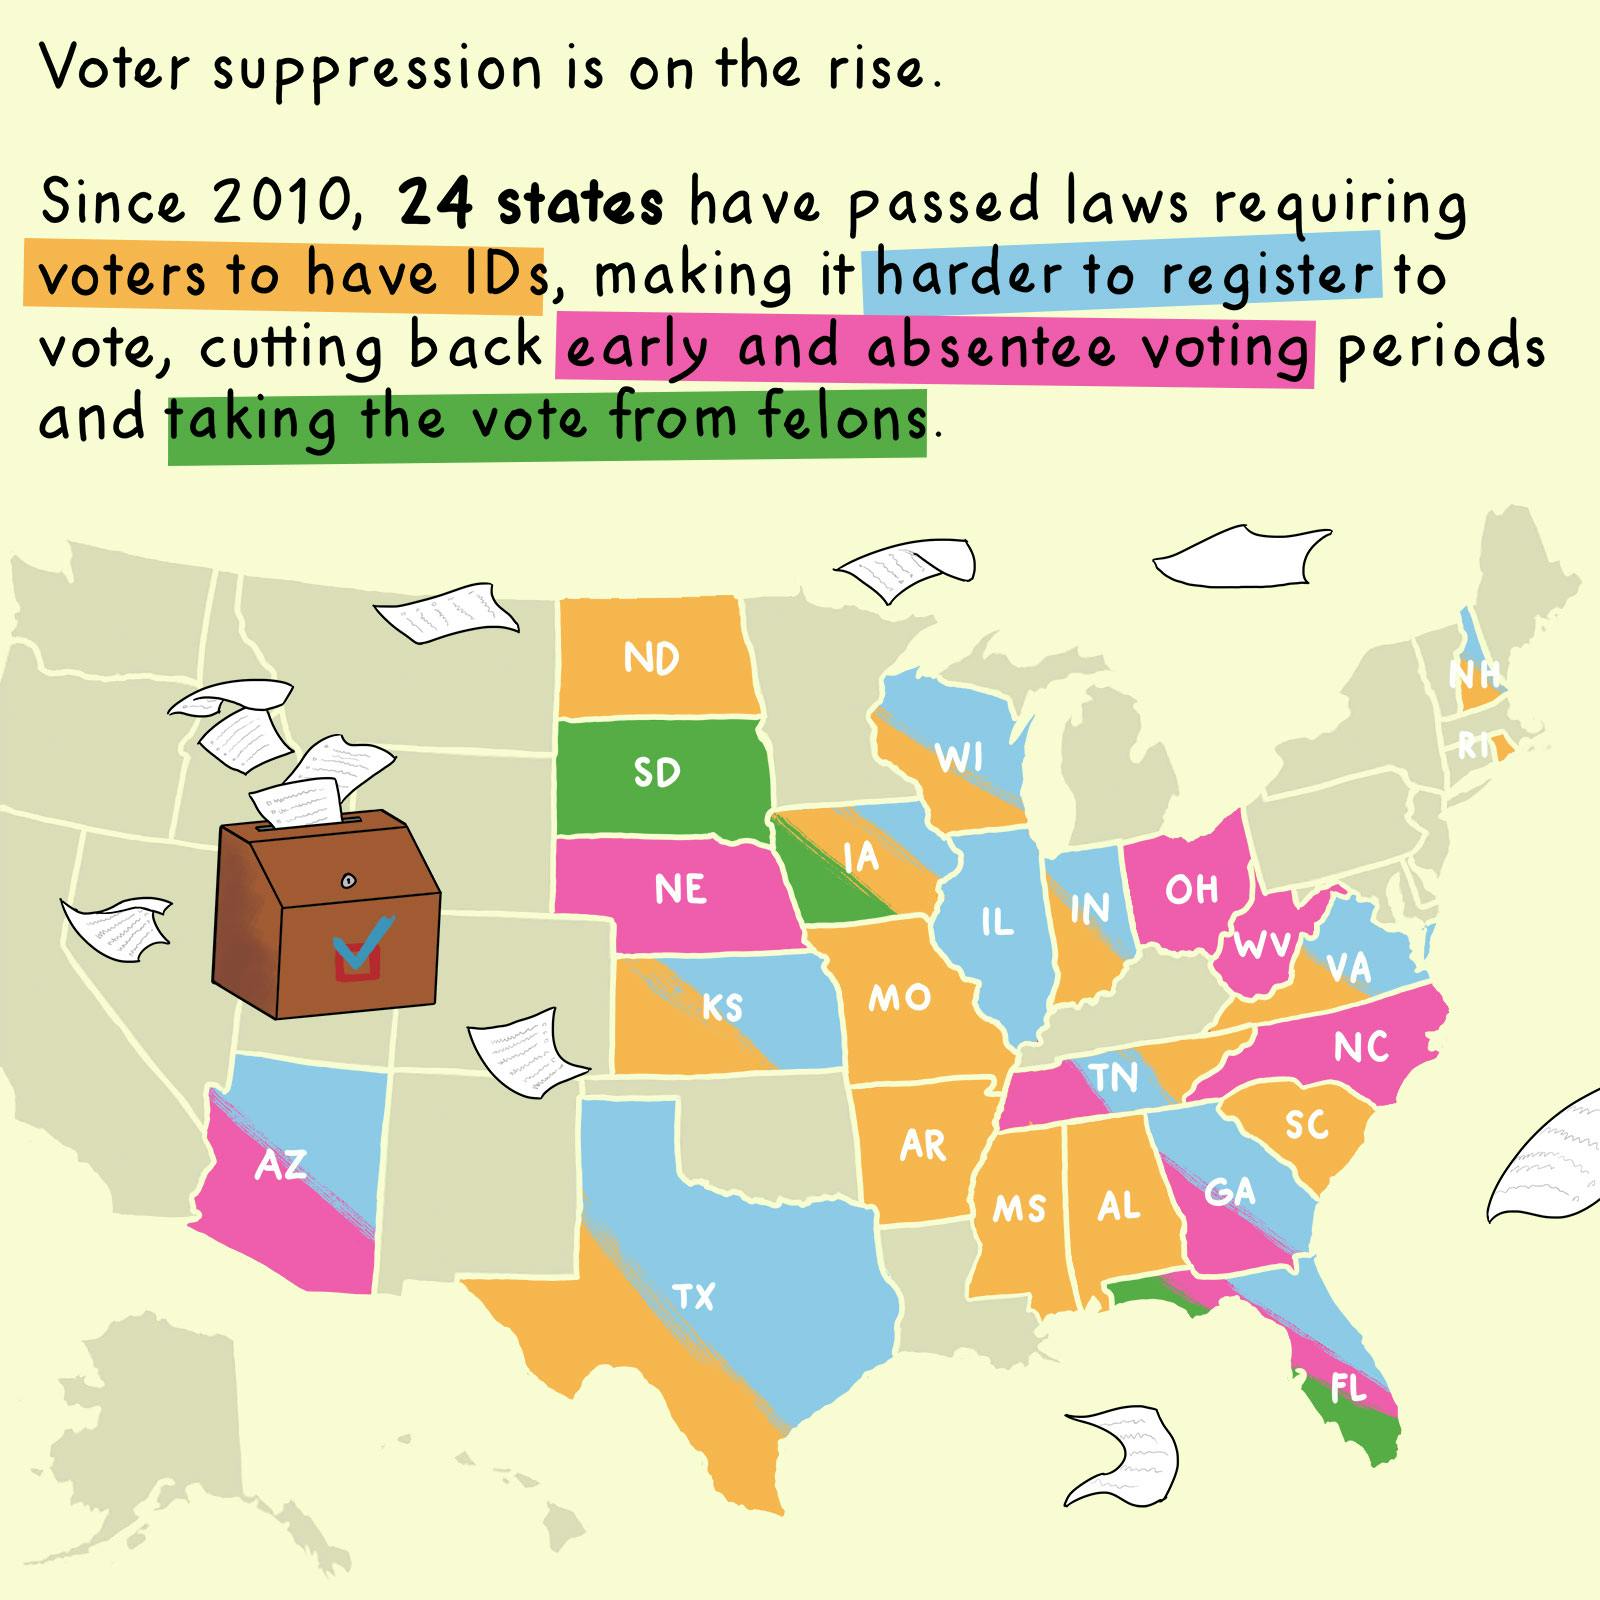 the-gop-is-betting-on-voter-suppression-1-ff8.jpeg